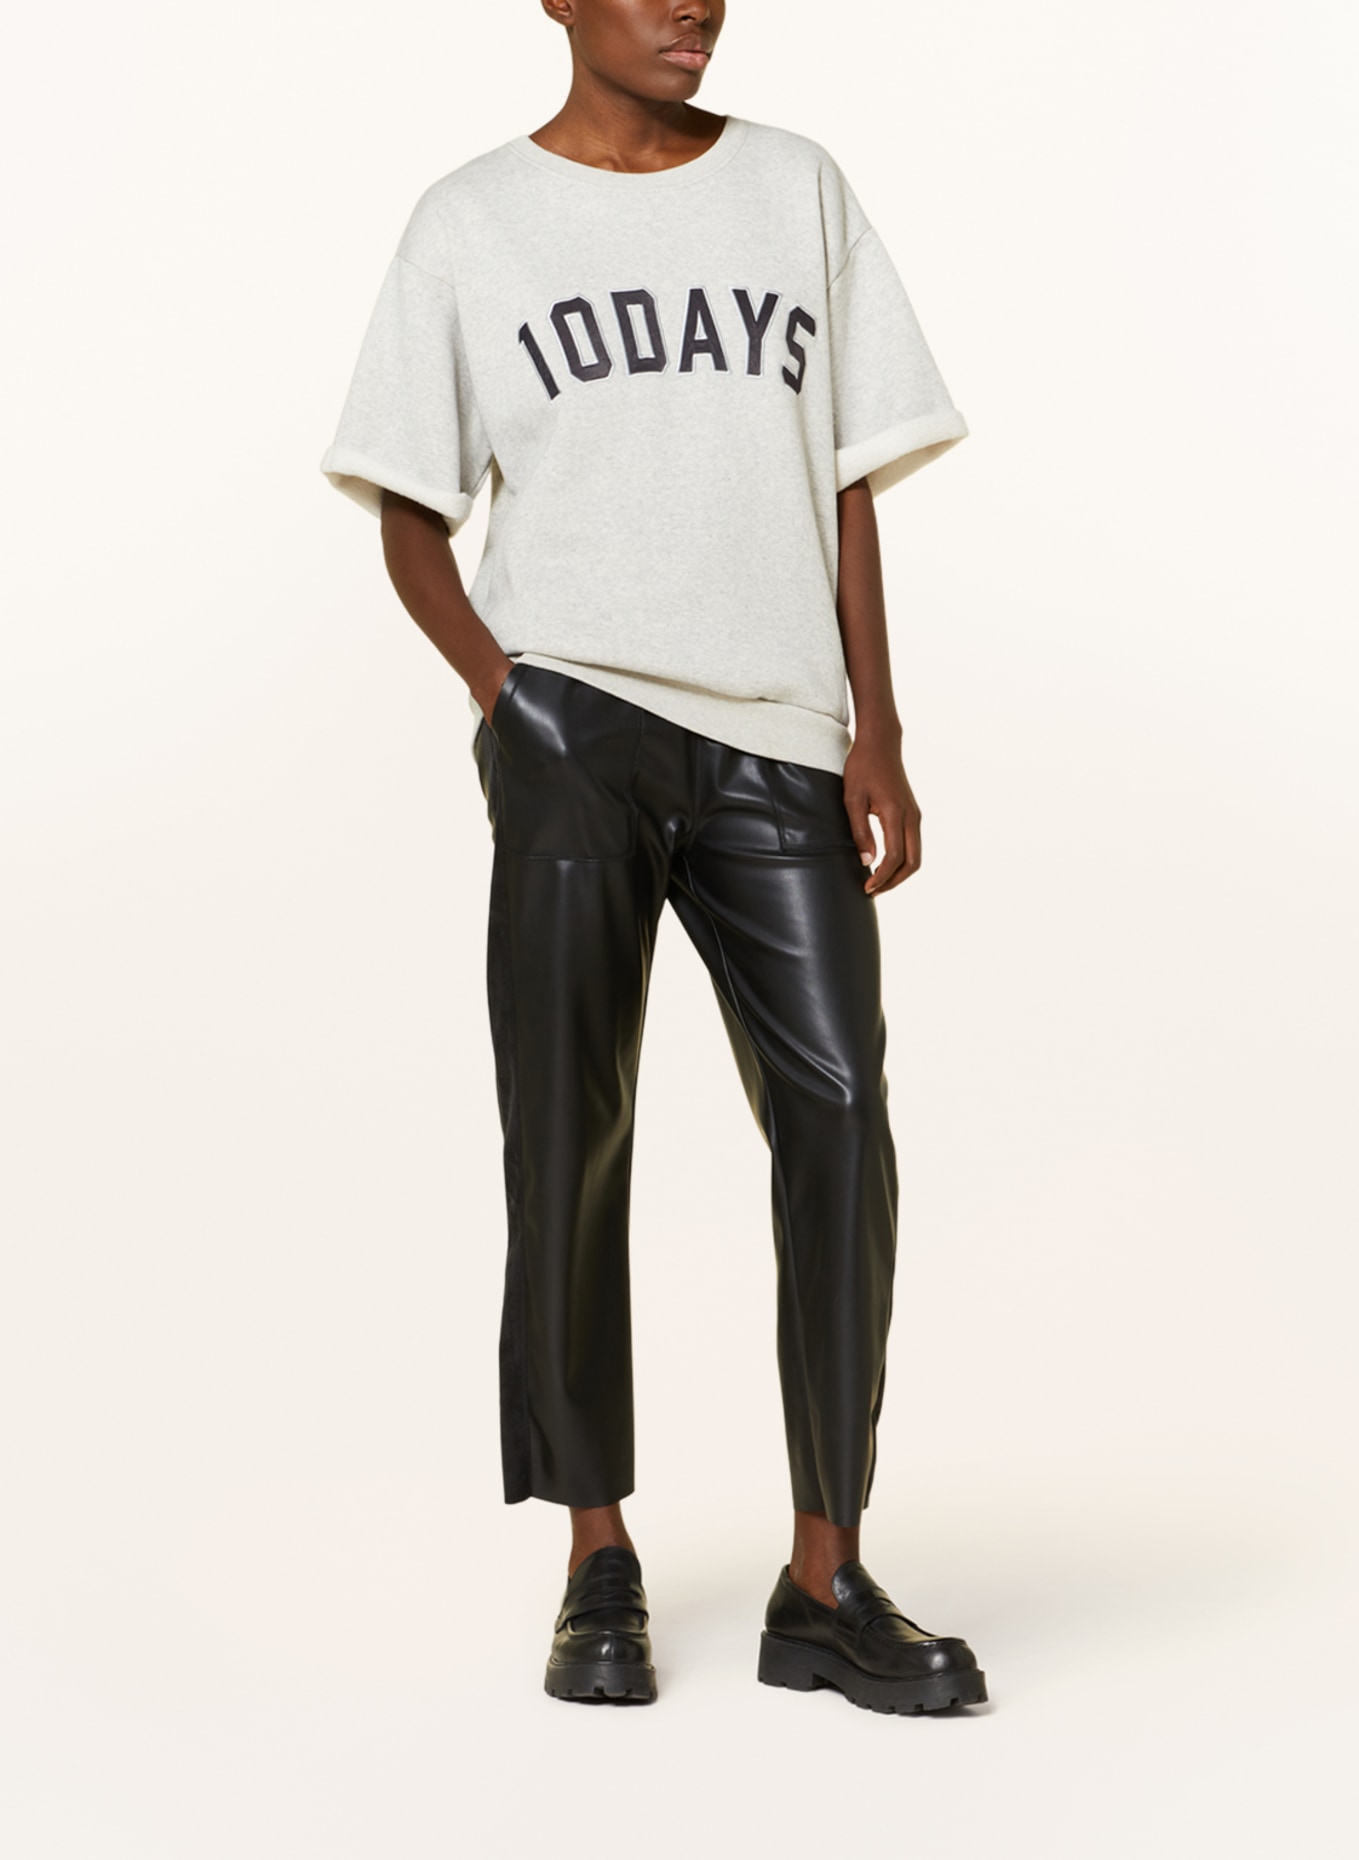 10DAYS Pants in jogger style in leather look, Color: BLACK (Image 2)